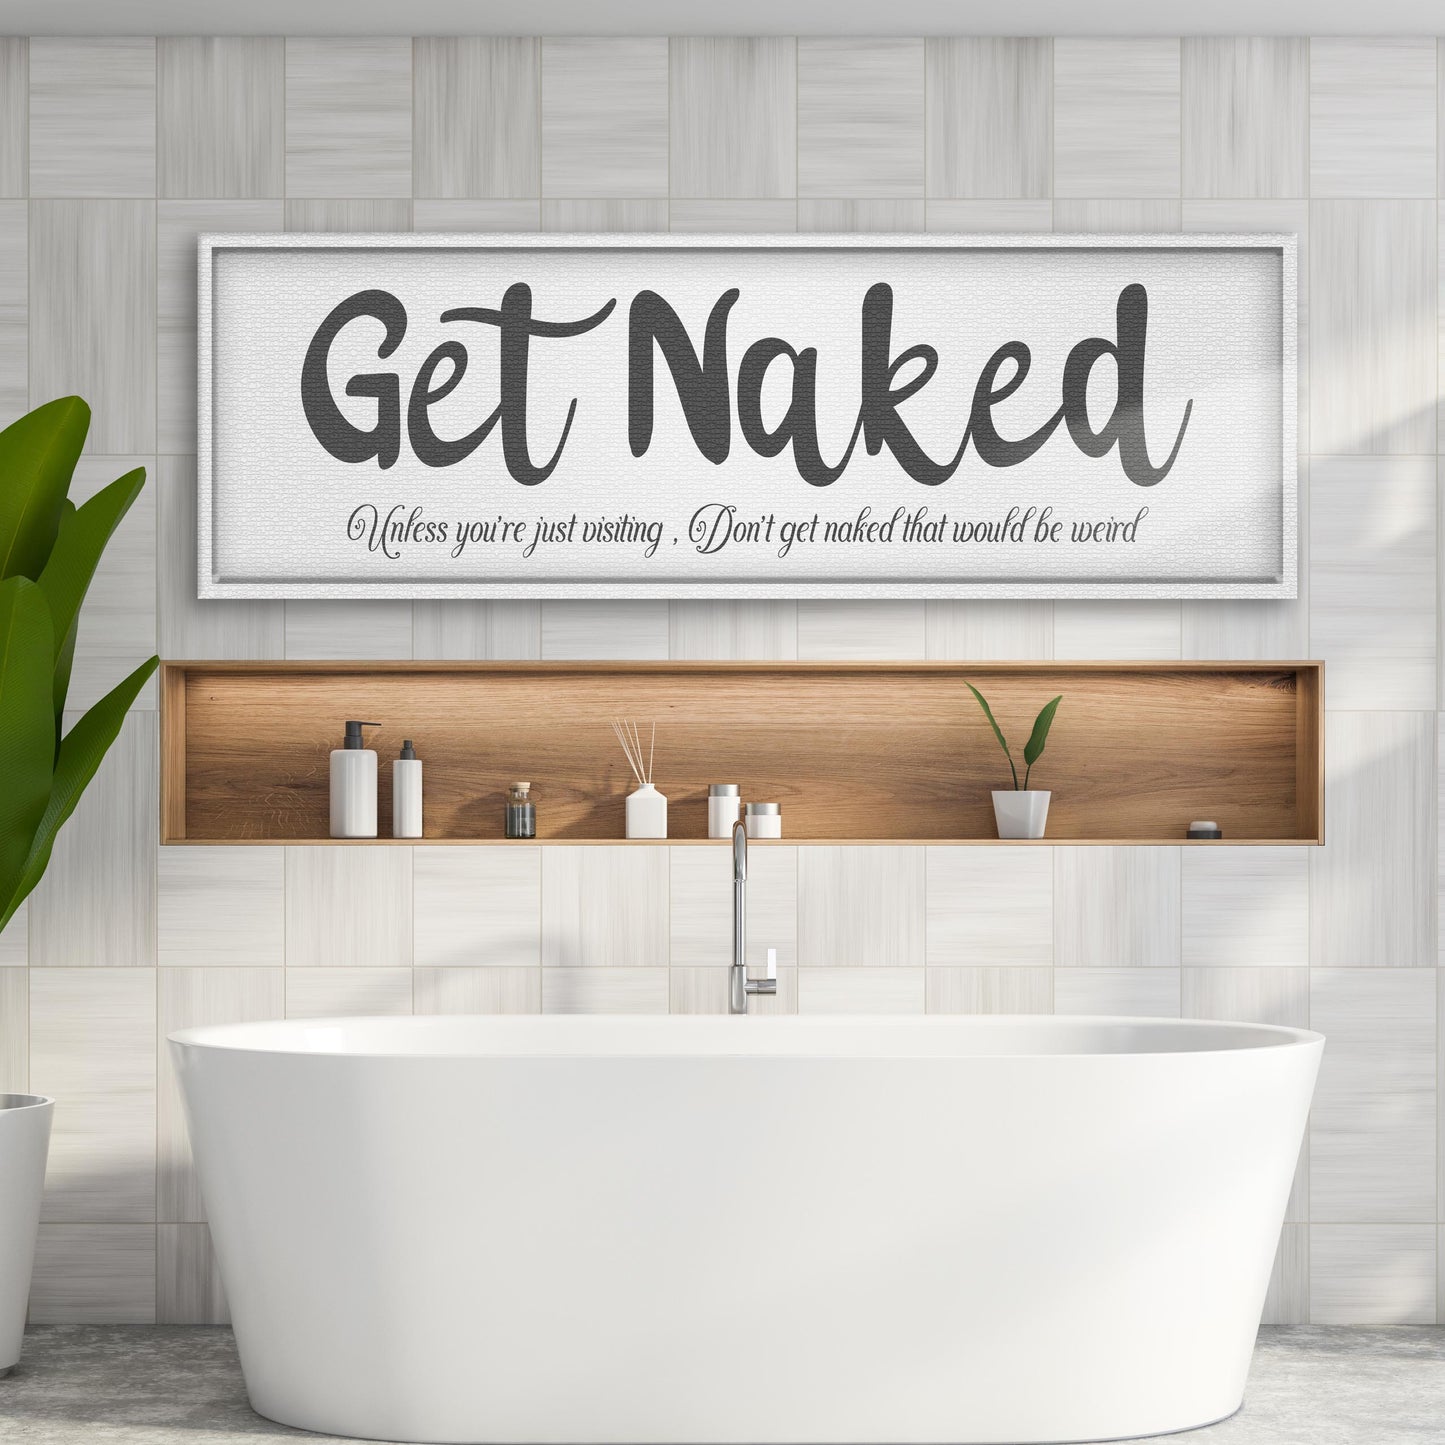 Get Naked Sign Style 1 - Image by Tailored Canvases